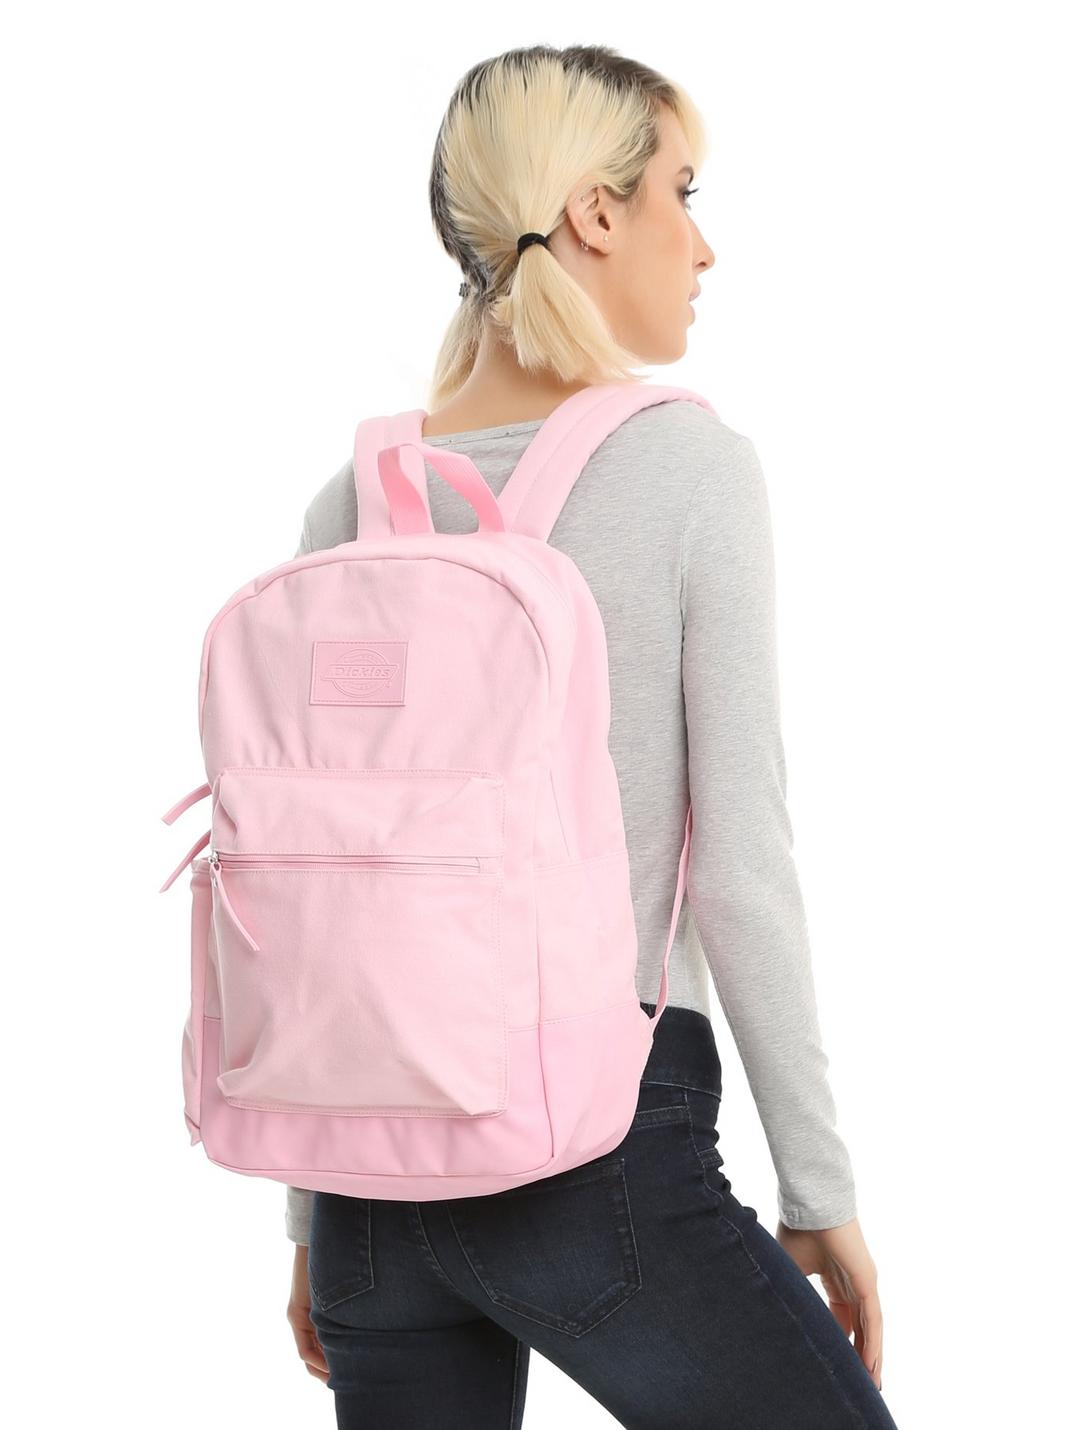 Dickies Pink Faux Leather Bottom Backpack, , hi-res